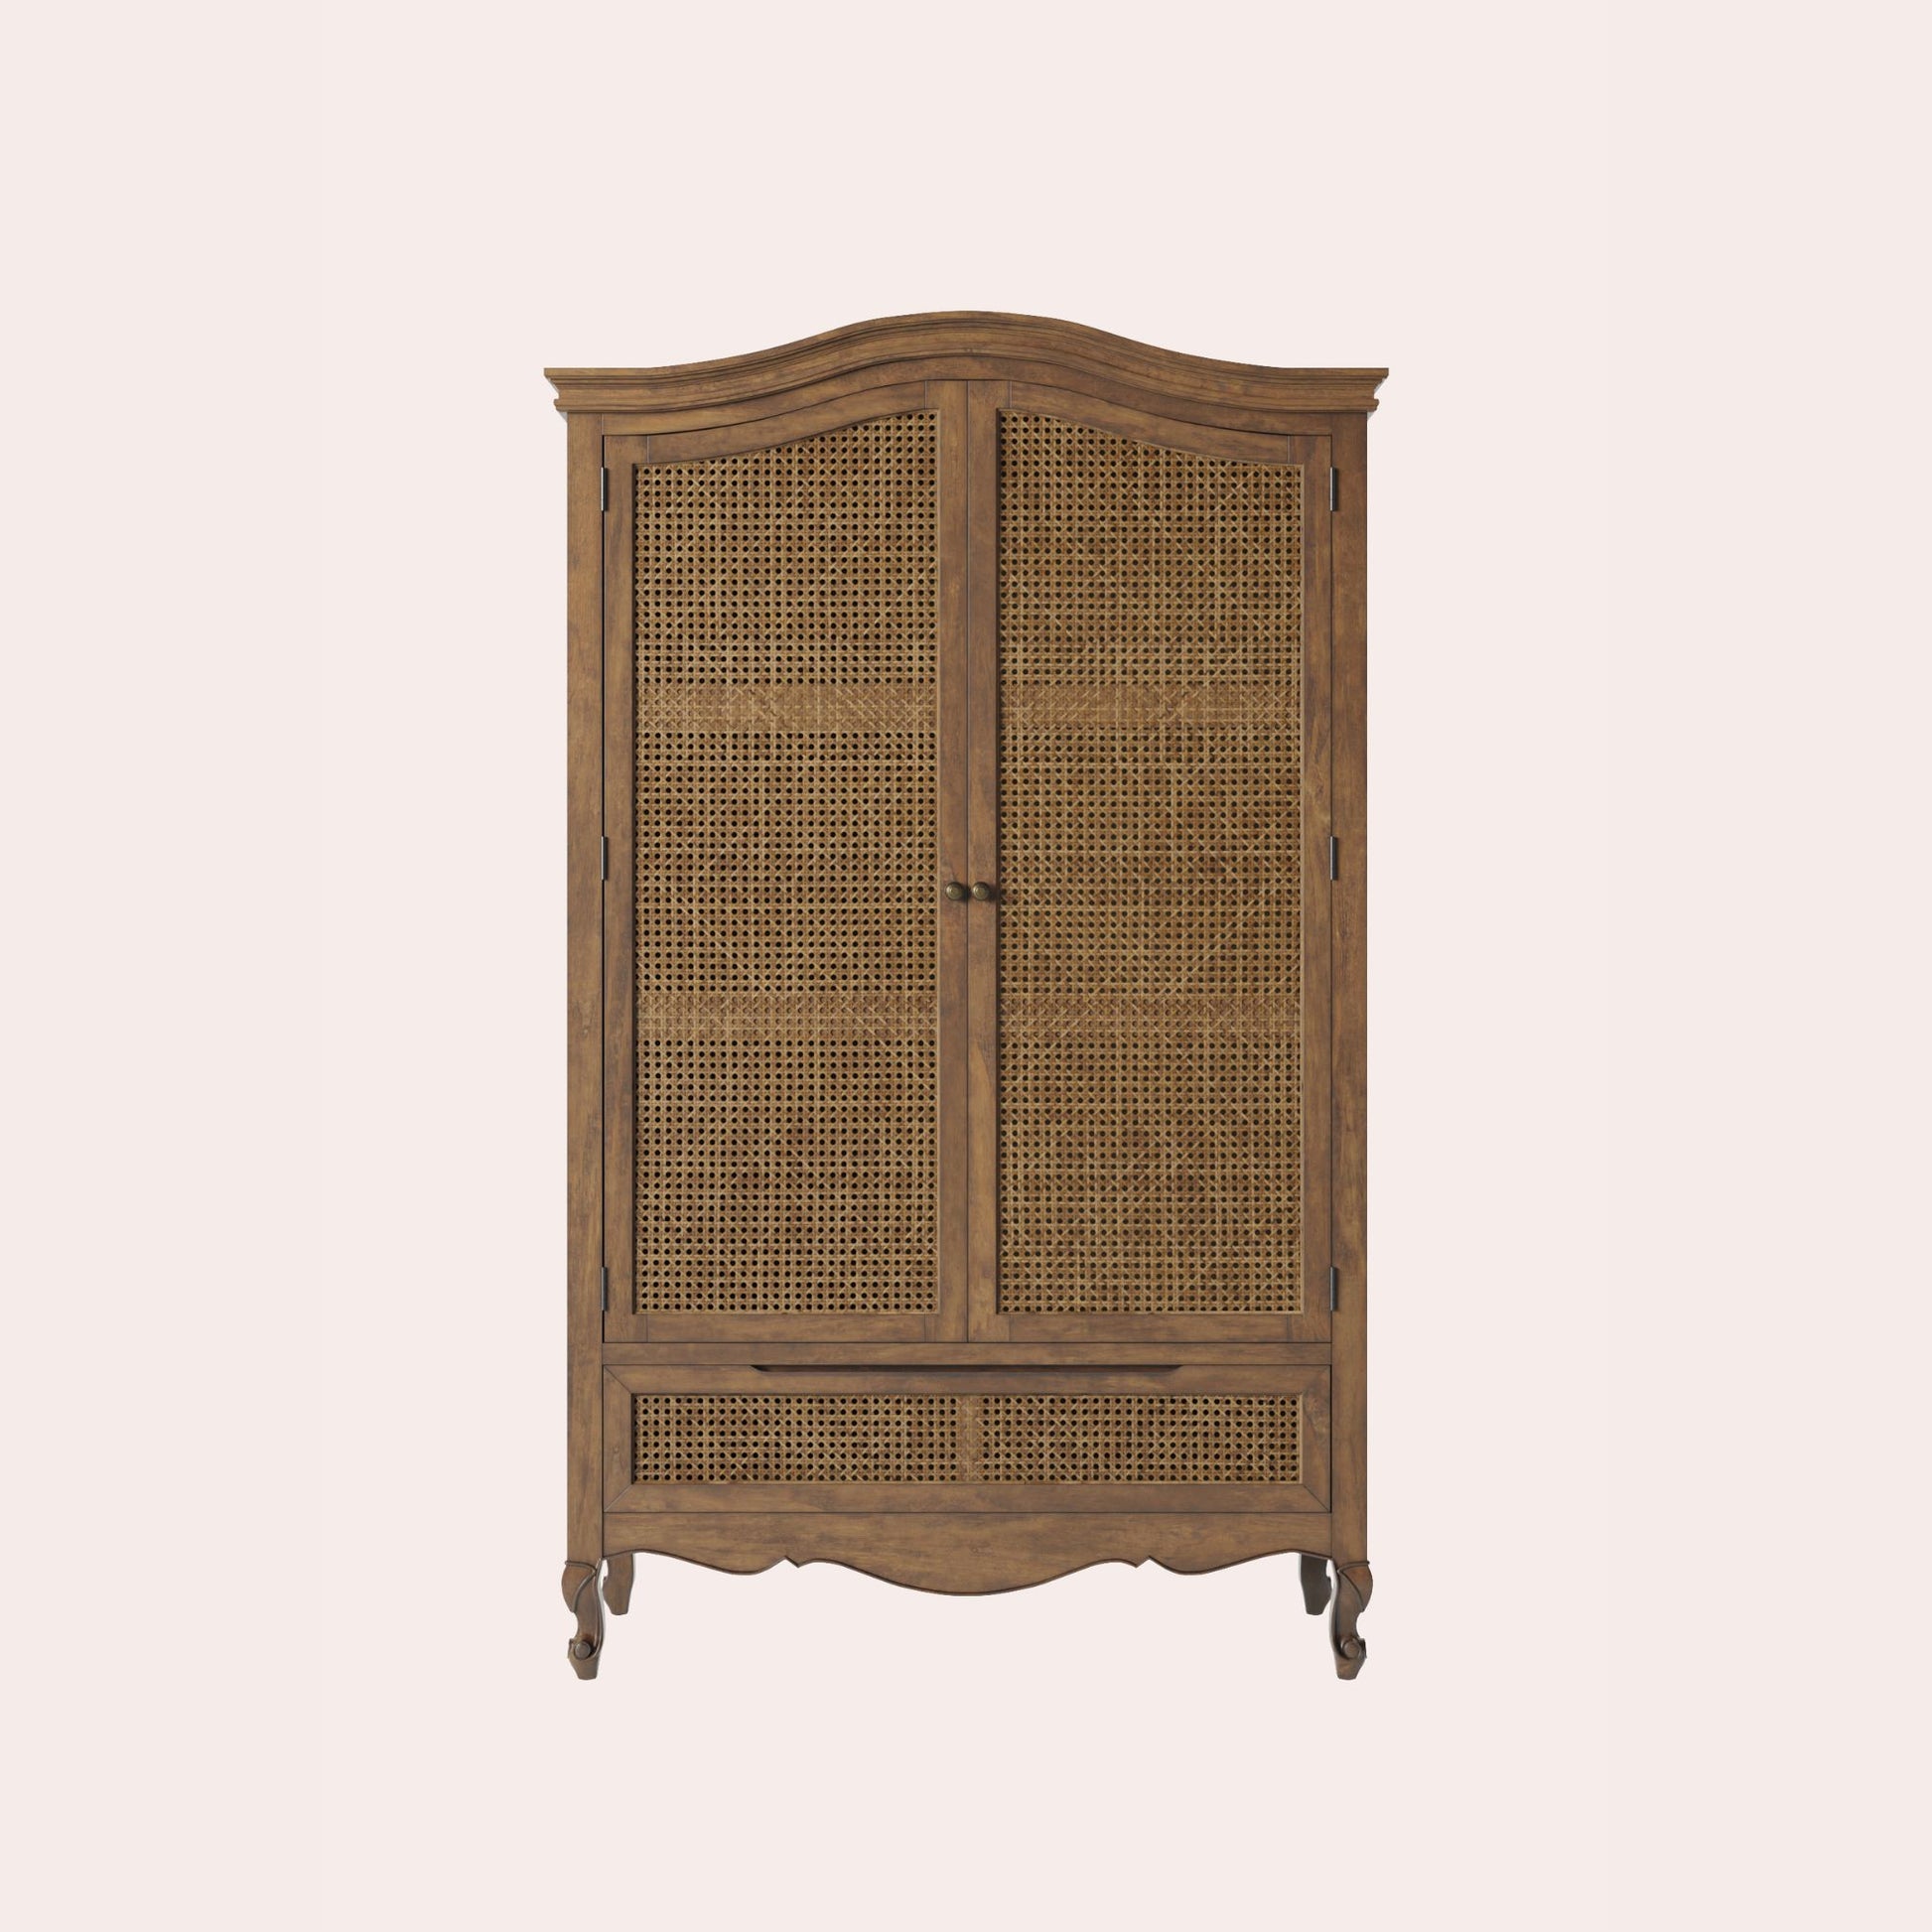 Front of walnut wardrobe with rattan inset doors and single bottom drawer